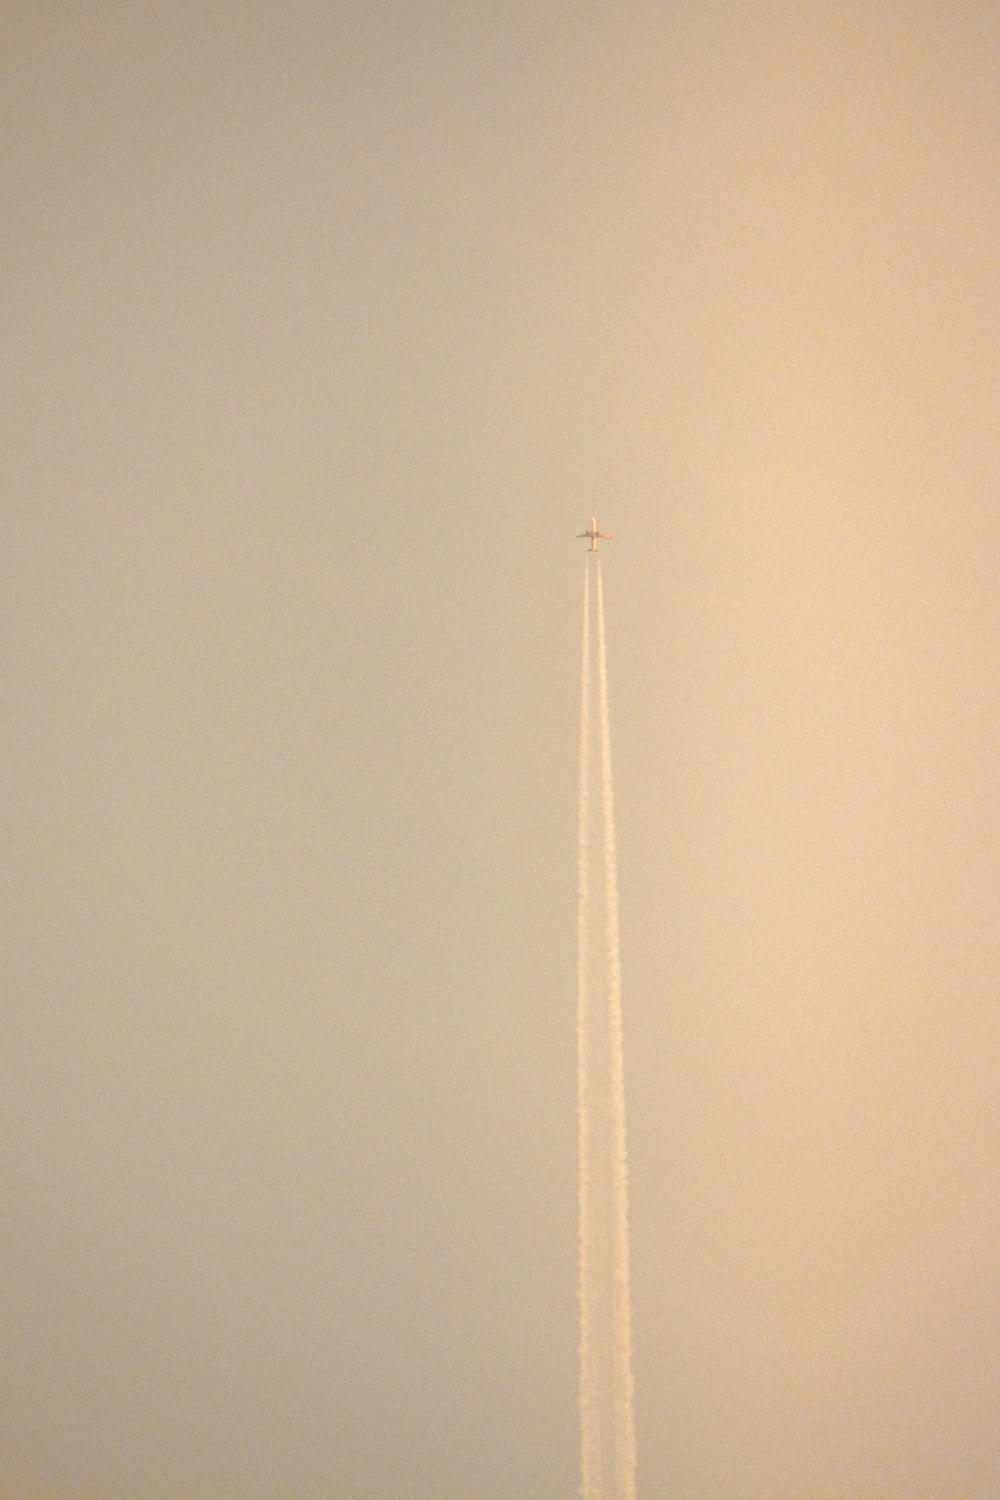 a plane flying in the sky with a trail of smoke behind it